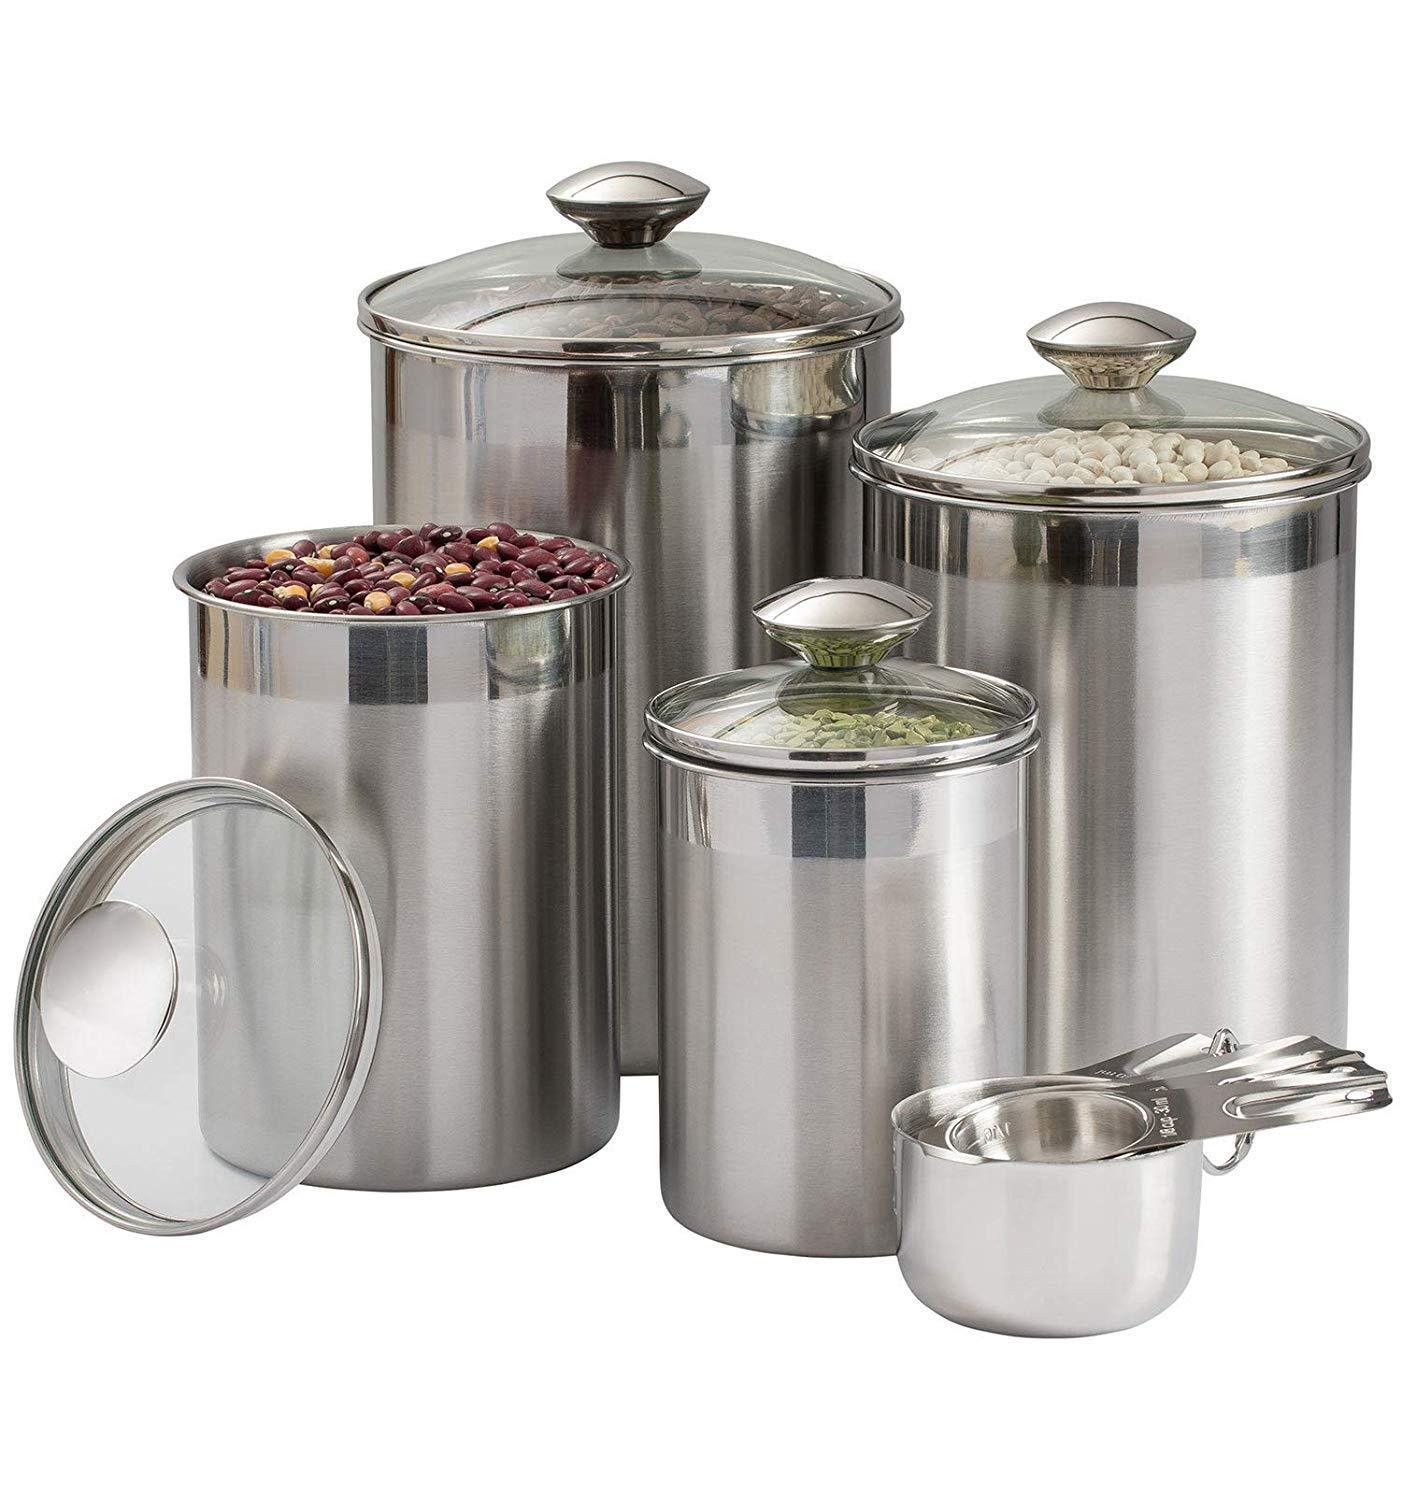 Storage beautiful canisters sets for the kitchen counter 8 piece stainless steel medium sized with glass lids and measuring cups silveronyx tea coffee sugar flour canisters 8pc glass lids